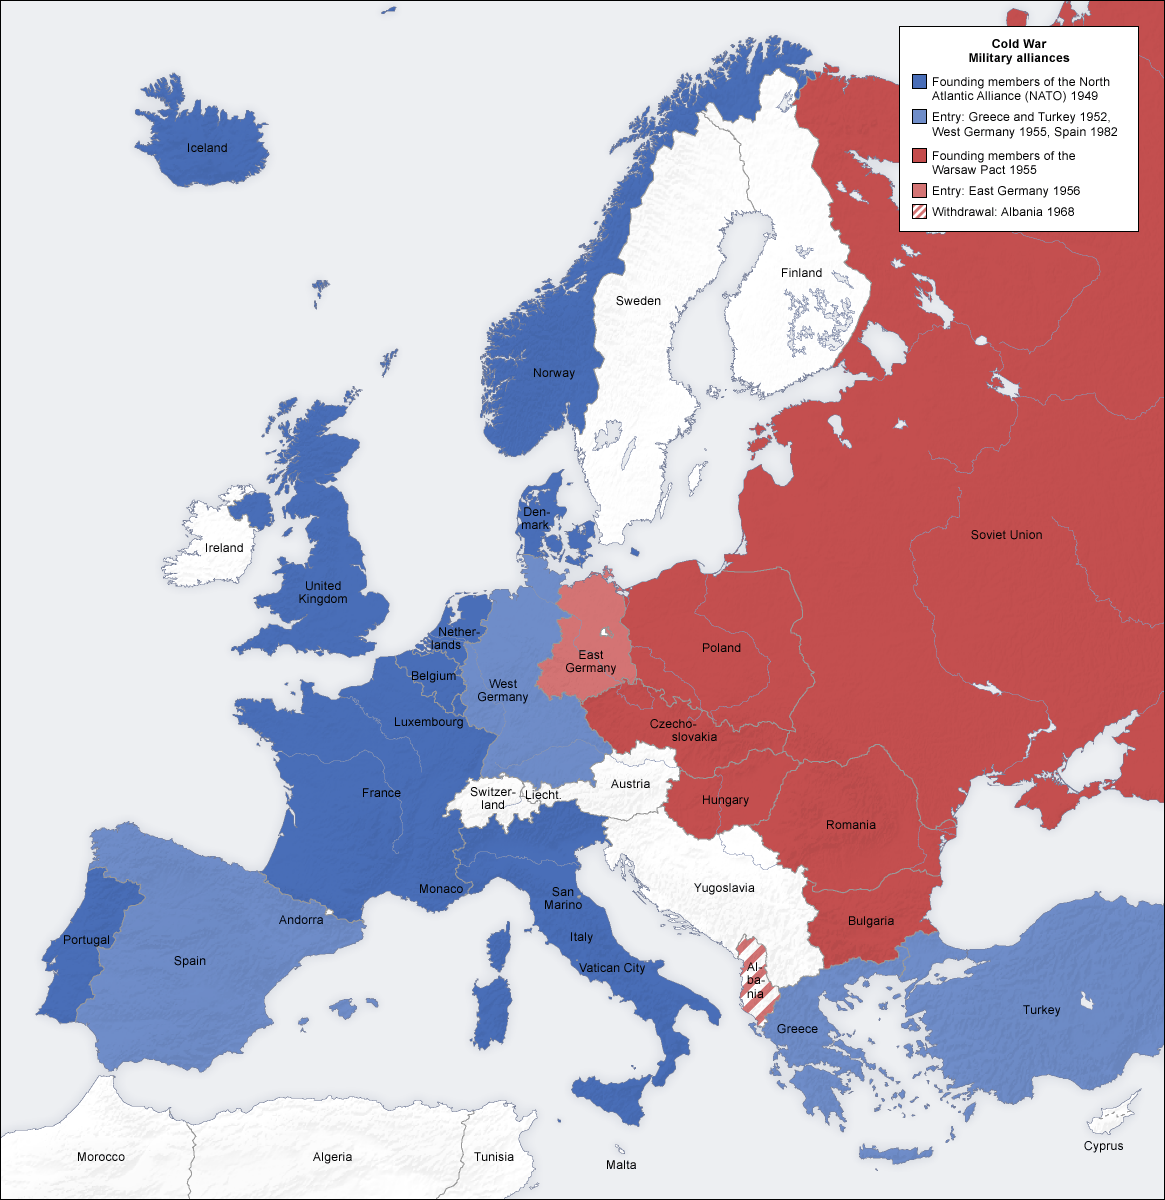 Cold War Military alliance in Europe - Full size